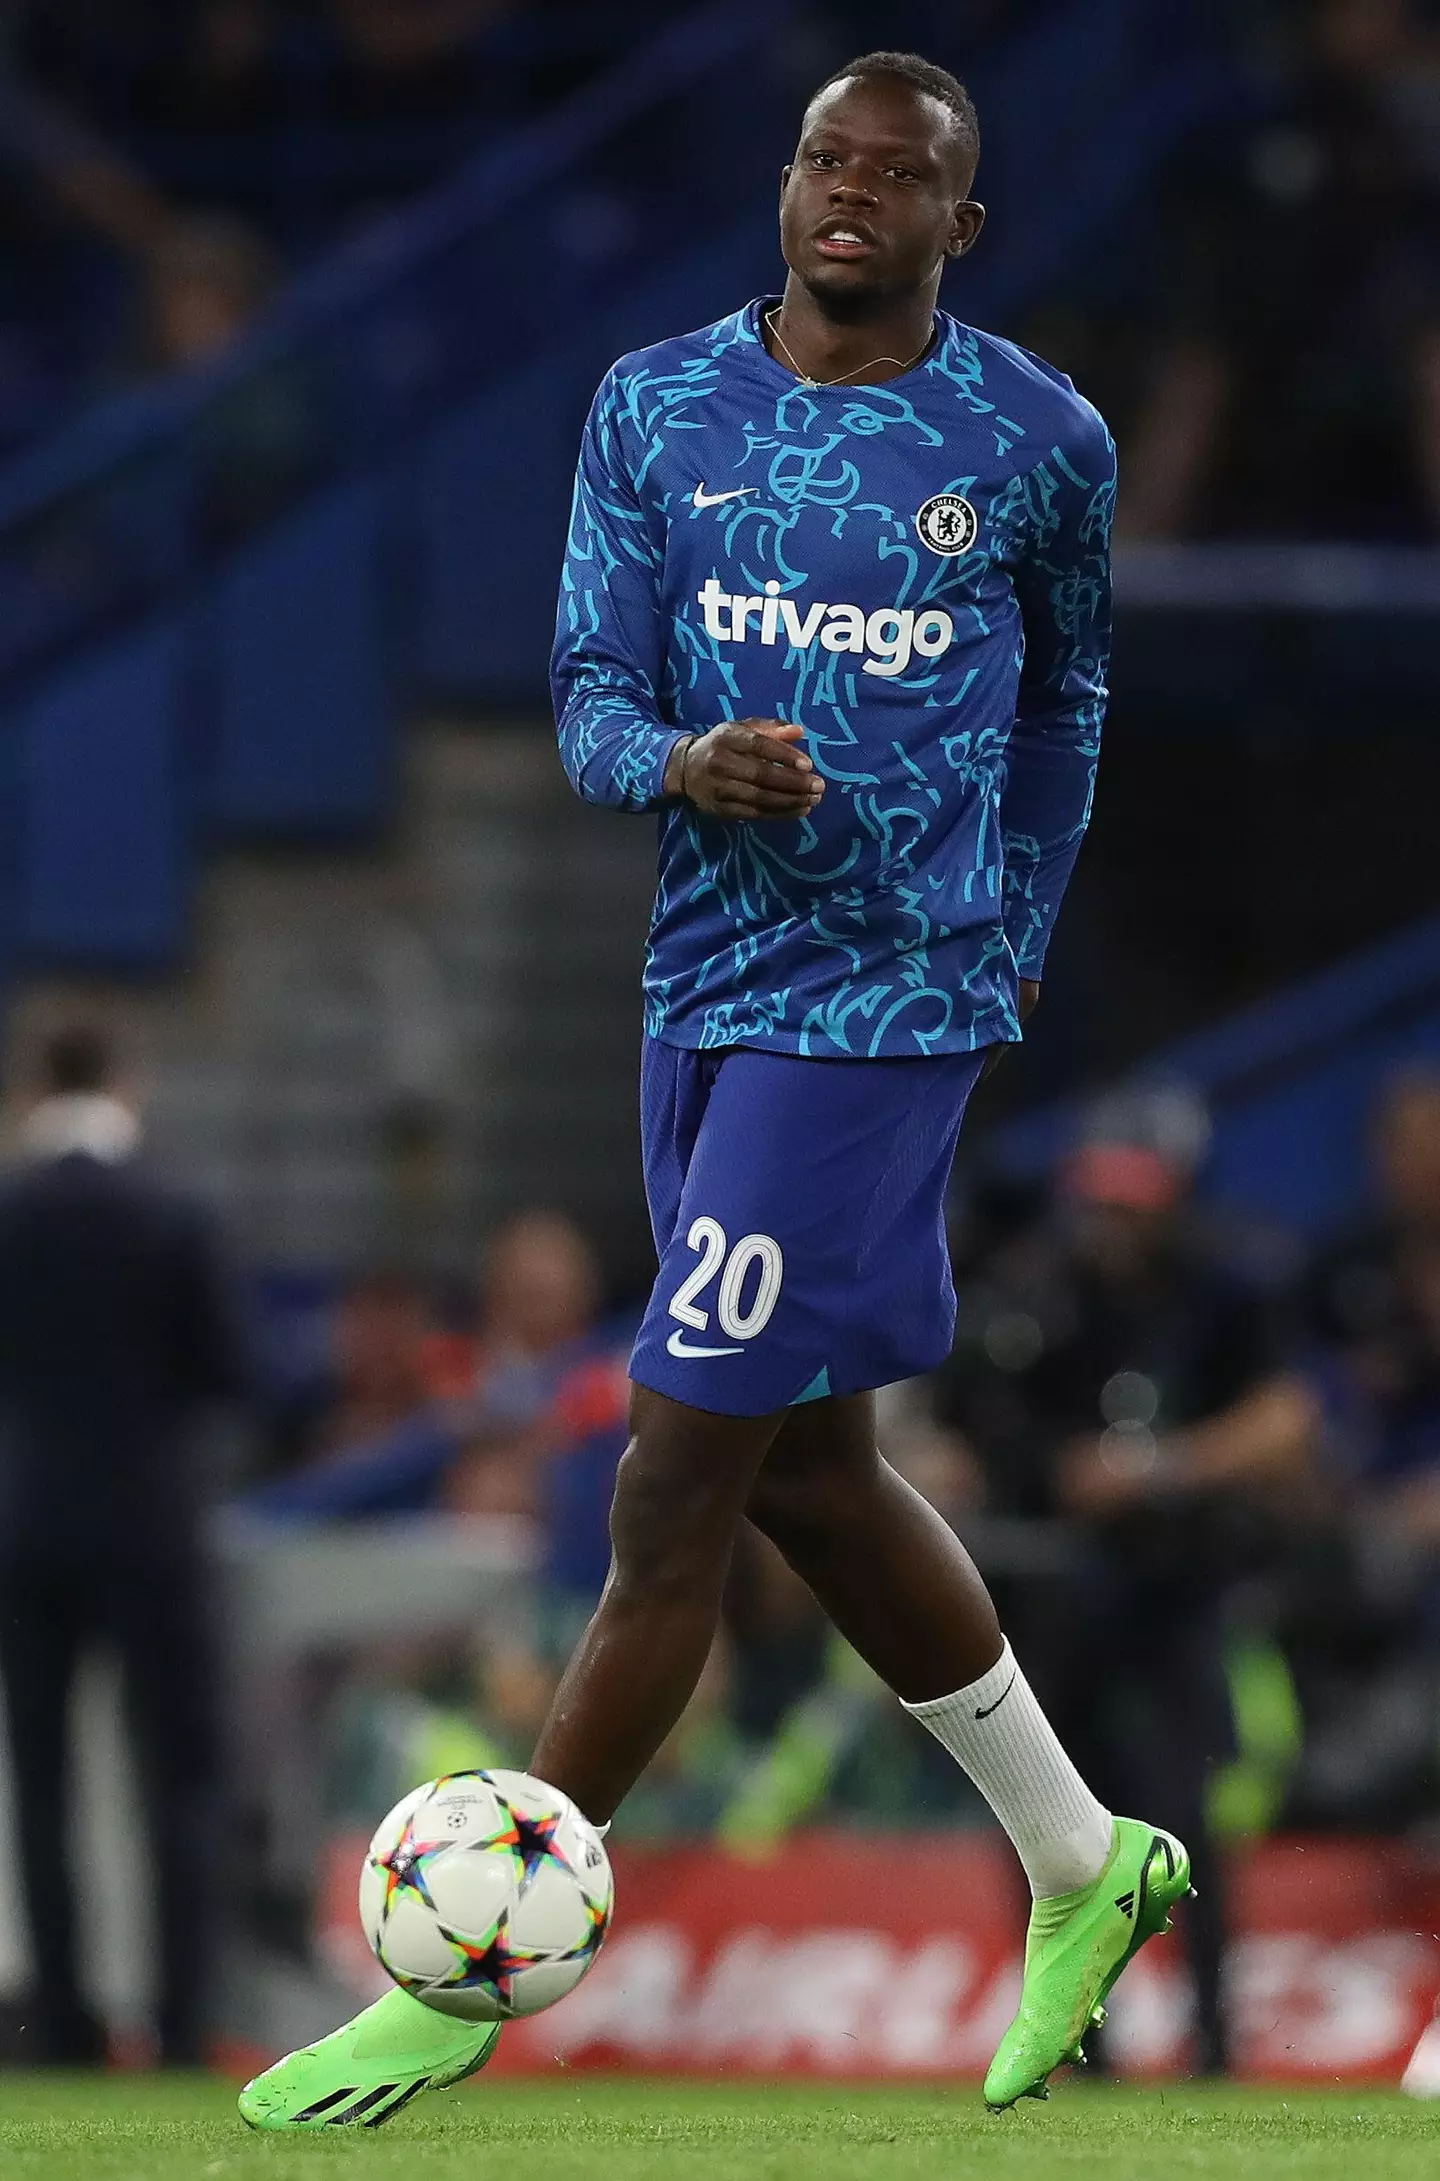 Denis Zakaria warming up for Chelsea before UEFA Champions League match. (Alamy)